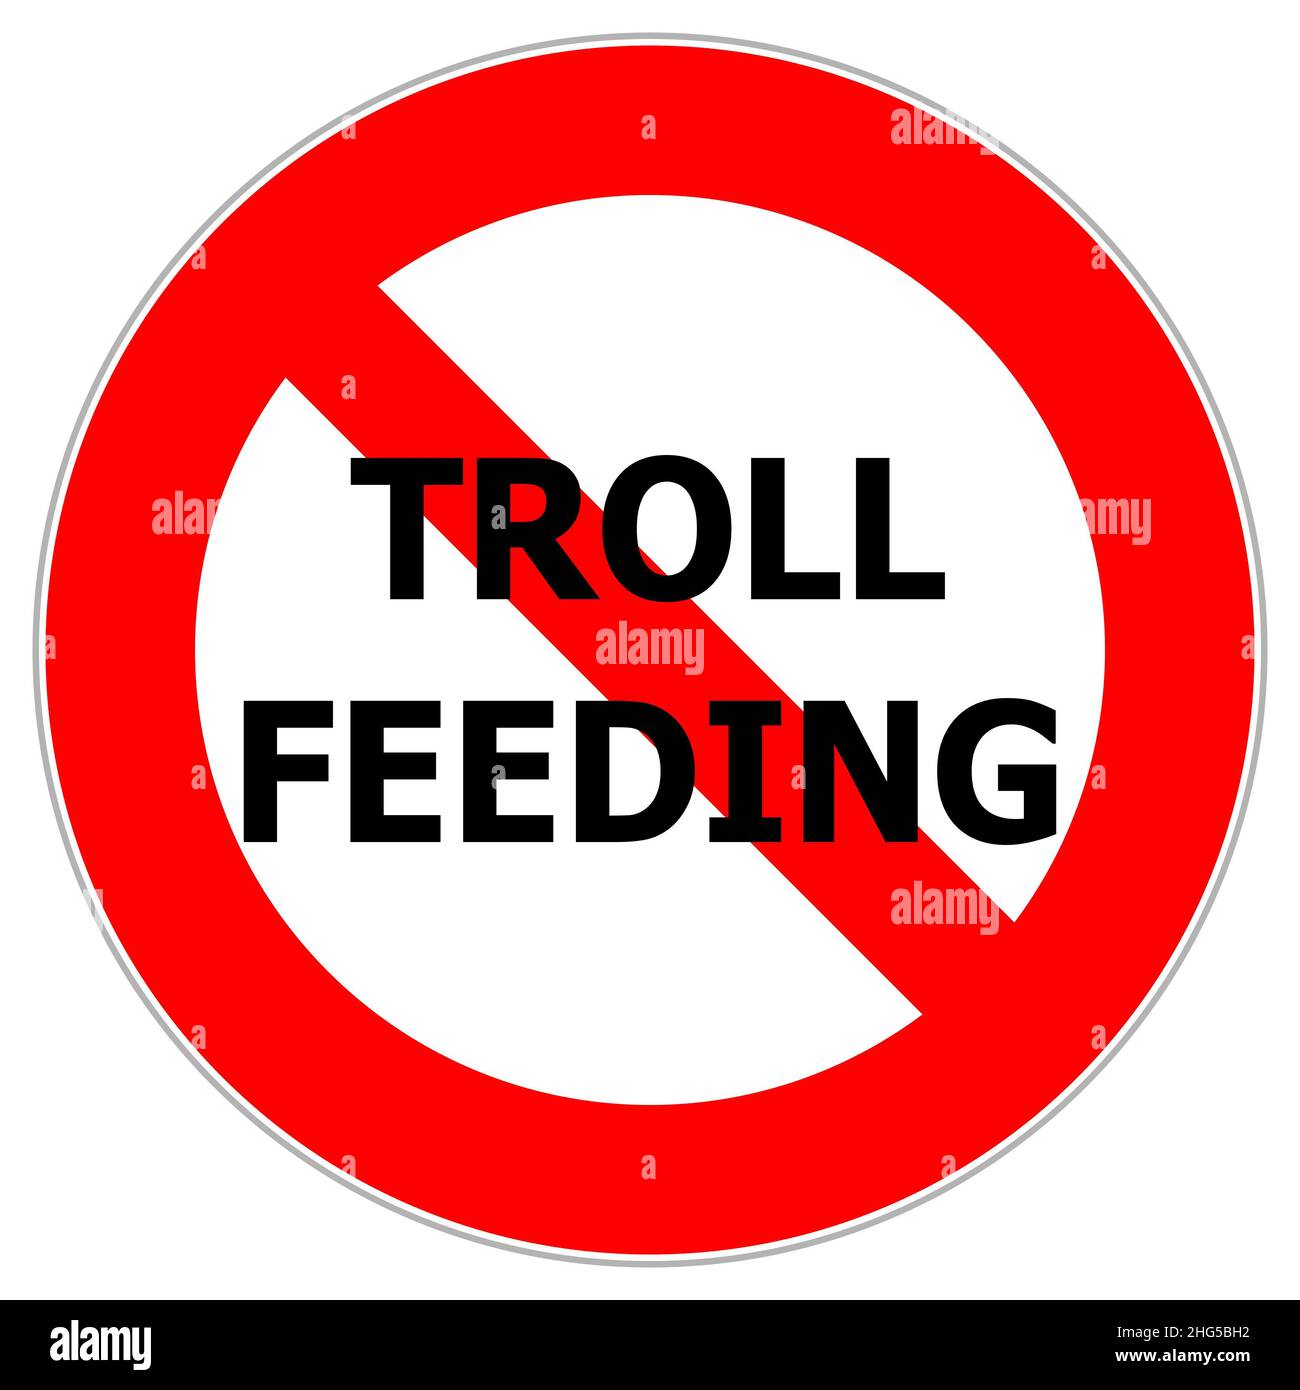 The red circle traffic sign alerting not to feed internet trolls who provoke in discussions Stock Photo